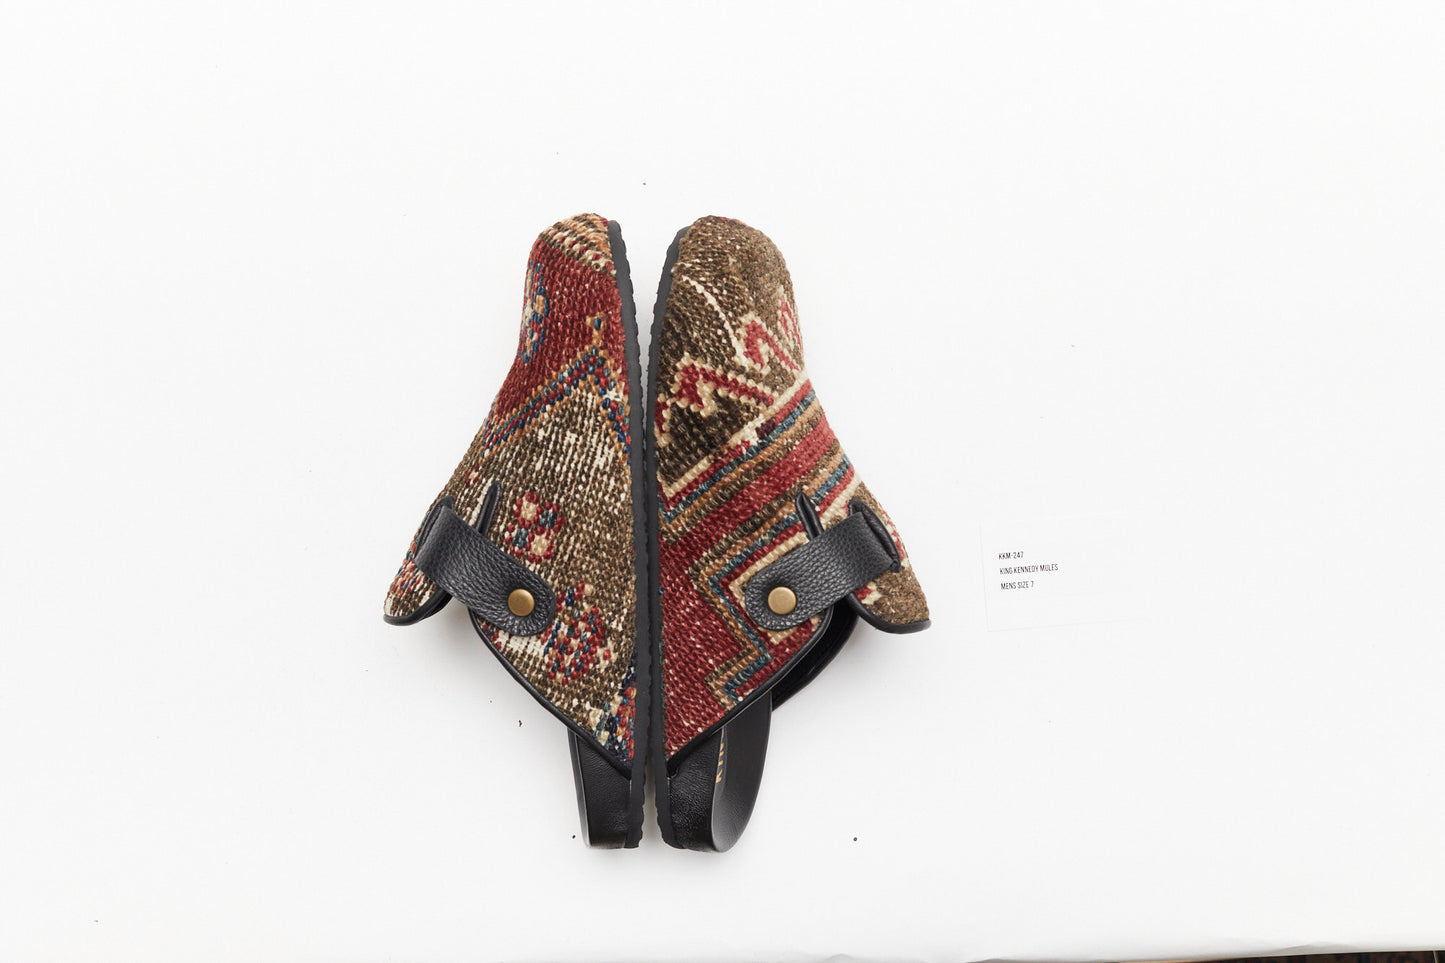 Side view of rug mules.  King Kennedy Rug Mules are one-of-a-kind and made of 100 year old antique Persian rug fragments with soft lambskin footbed and rubber sole. This pair is made of an antique Persian rug with a taupe, tan base with red and cream patterns. Made in Los Angeles.